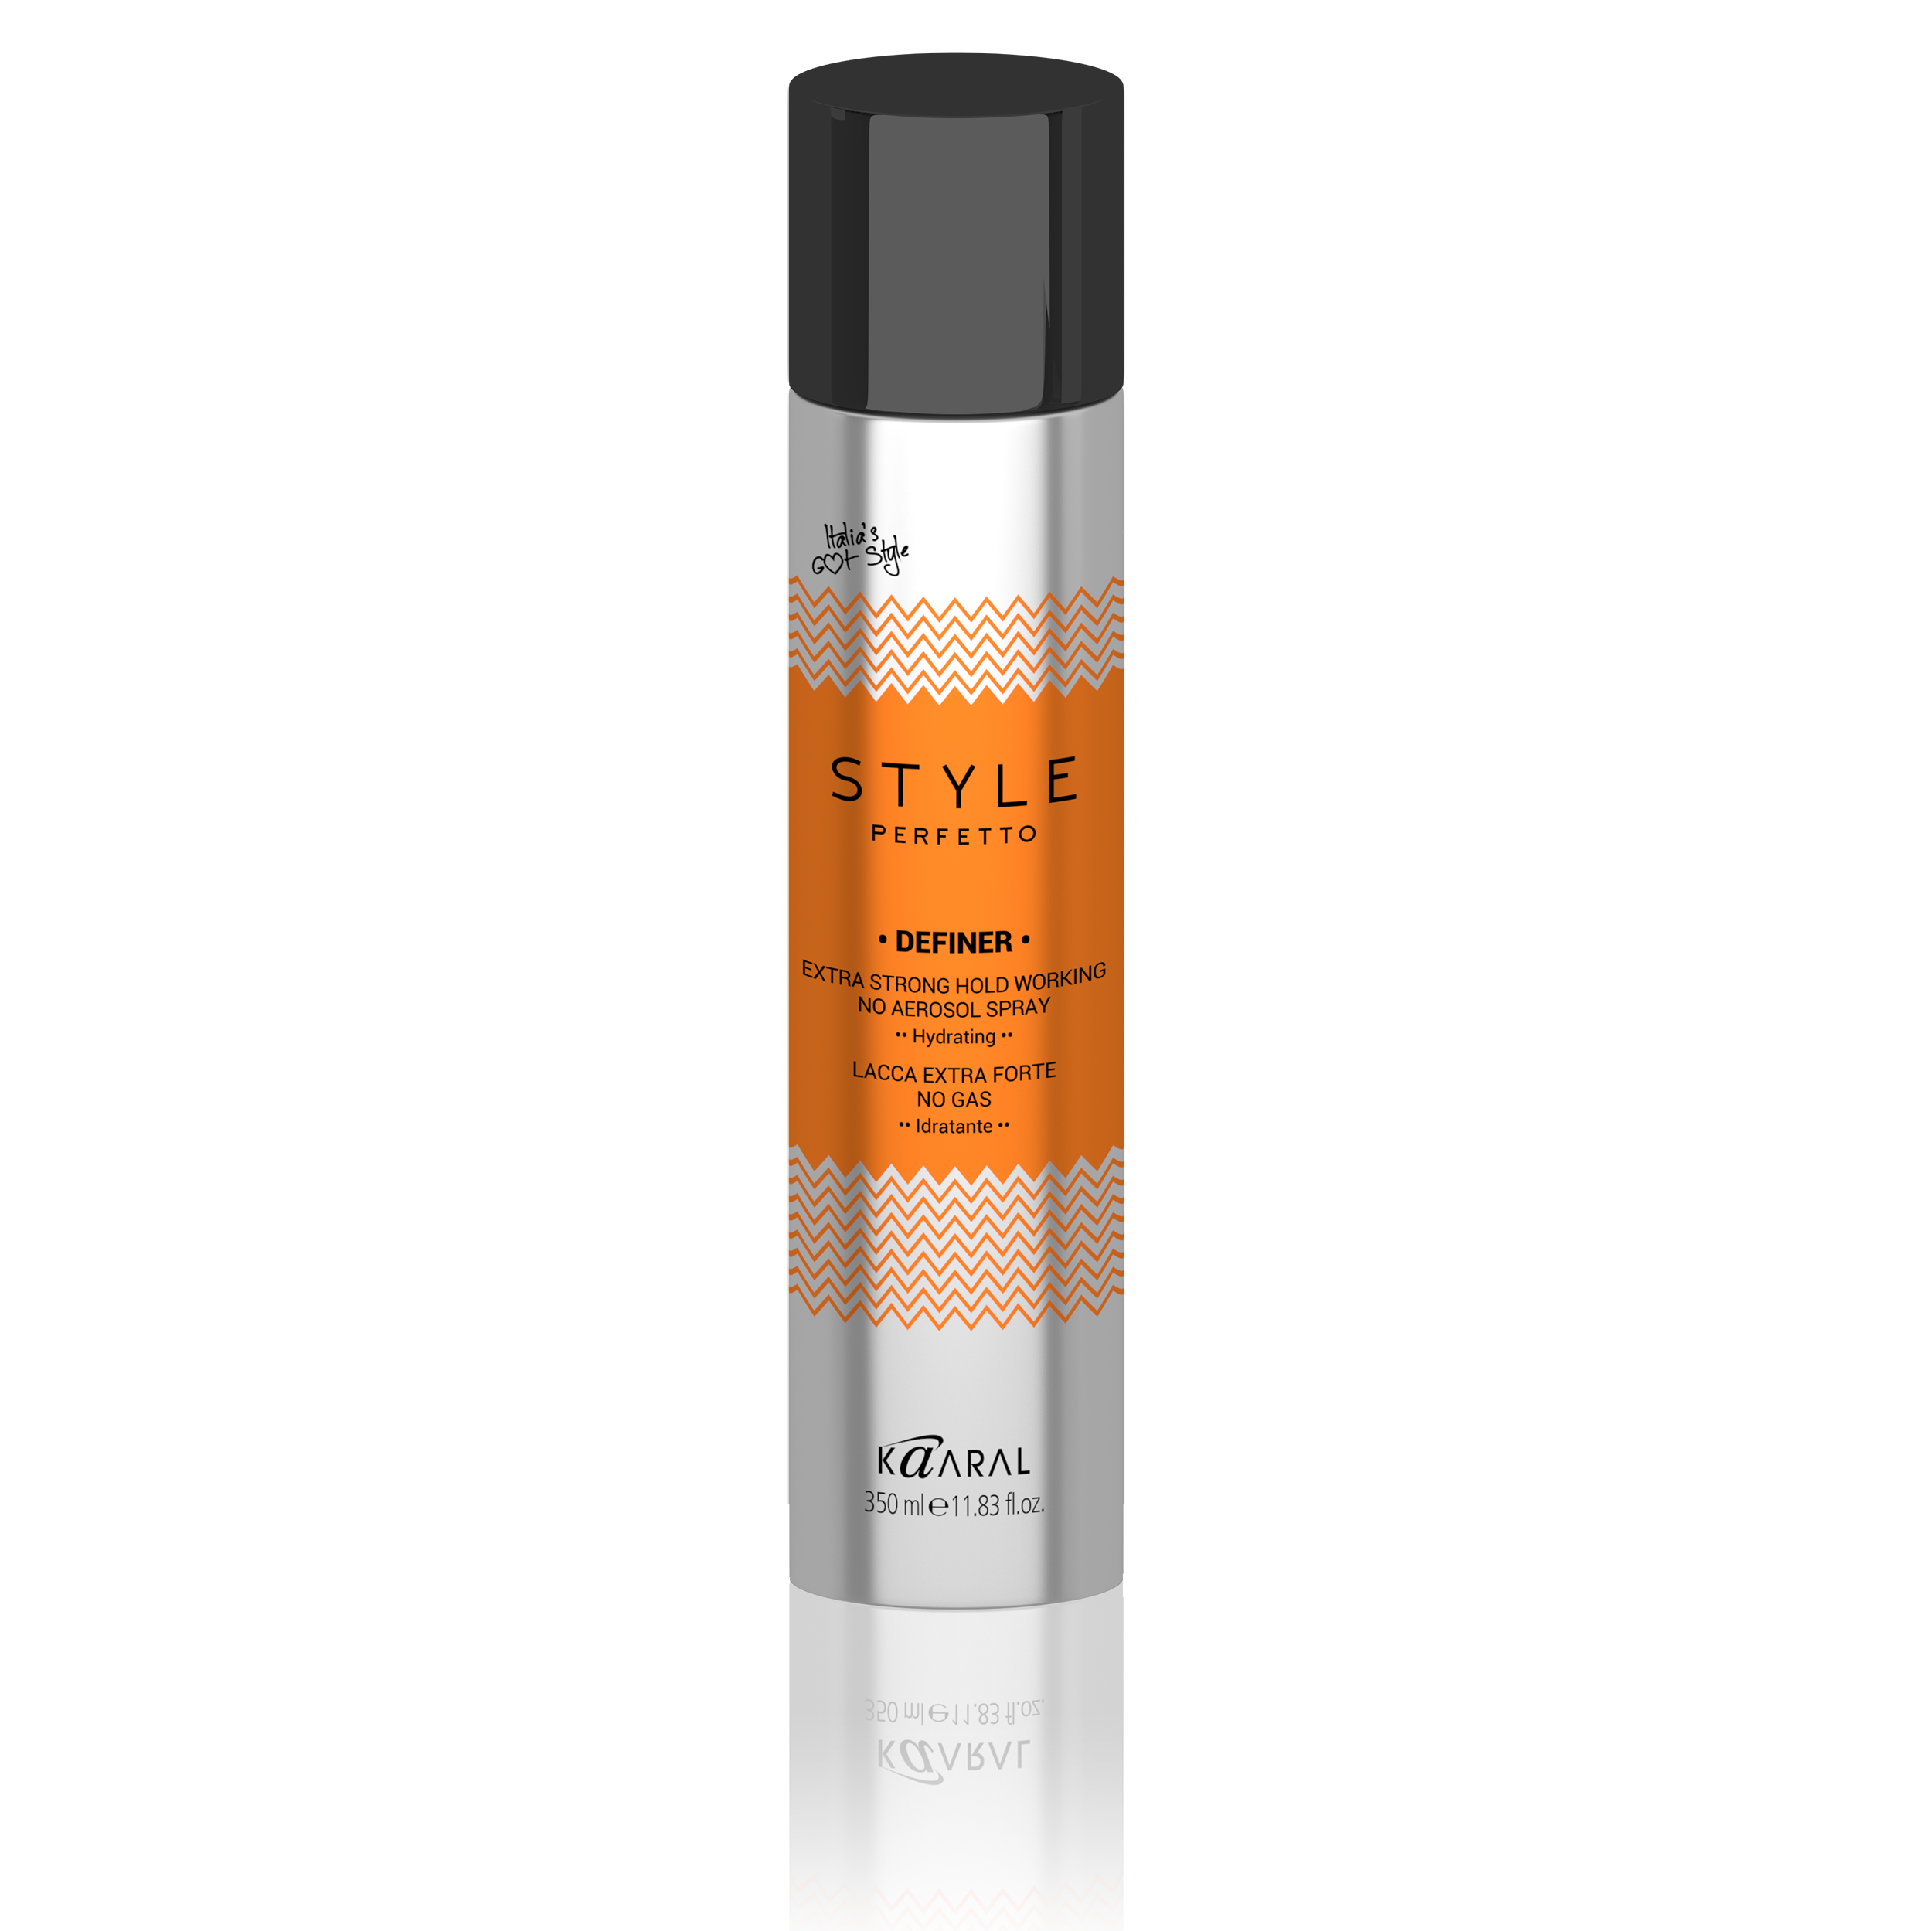 Kaaral - Style Perfetto Definer Extra Strong Hold No Aerosol Spray - Creata Beauty - Professional Beauty Products